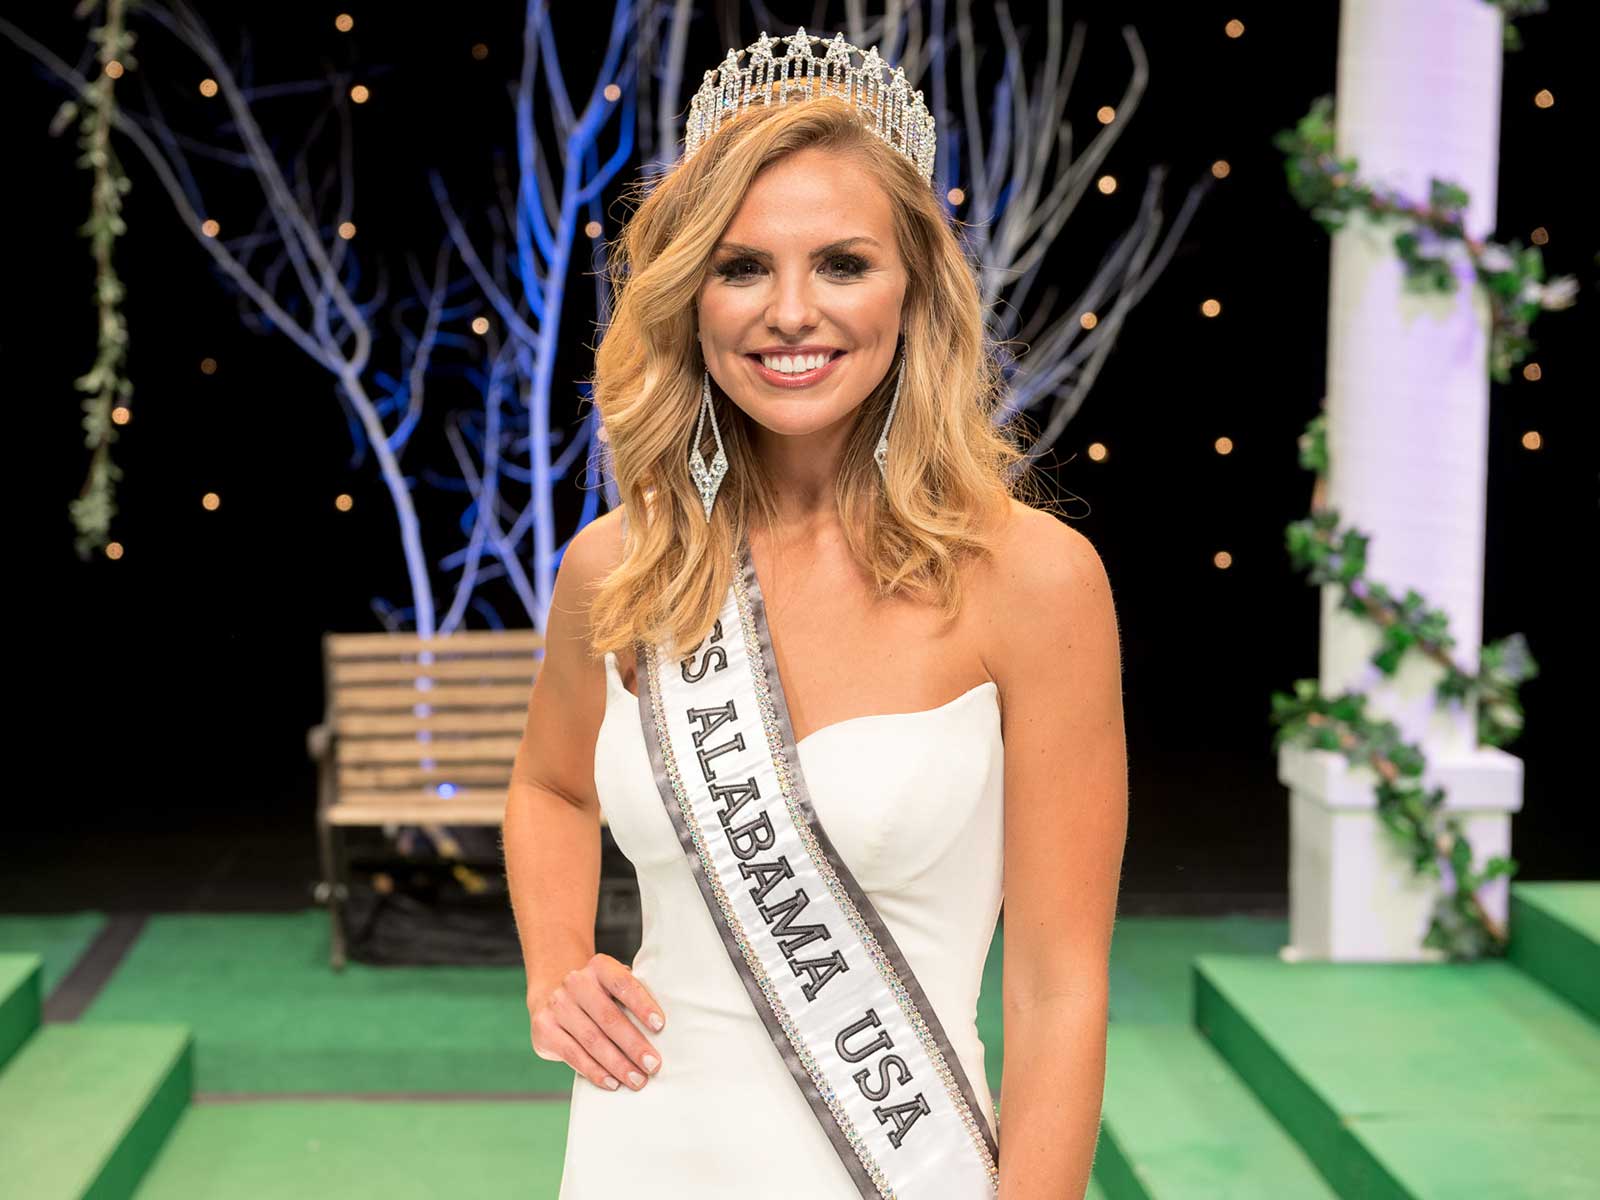 Miss Alabama To Compete On Season 23 of The Bachelor